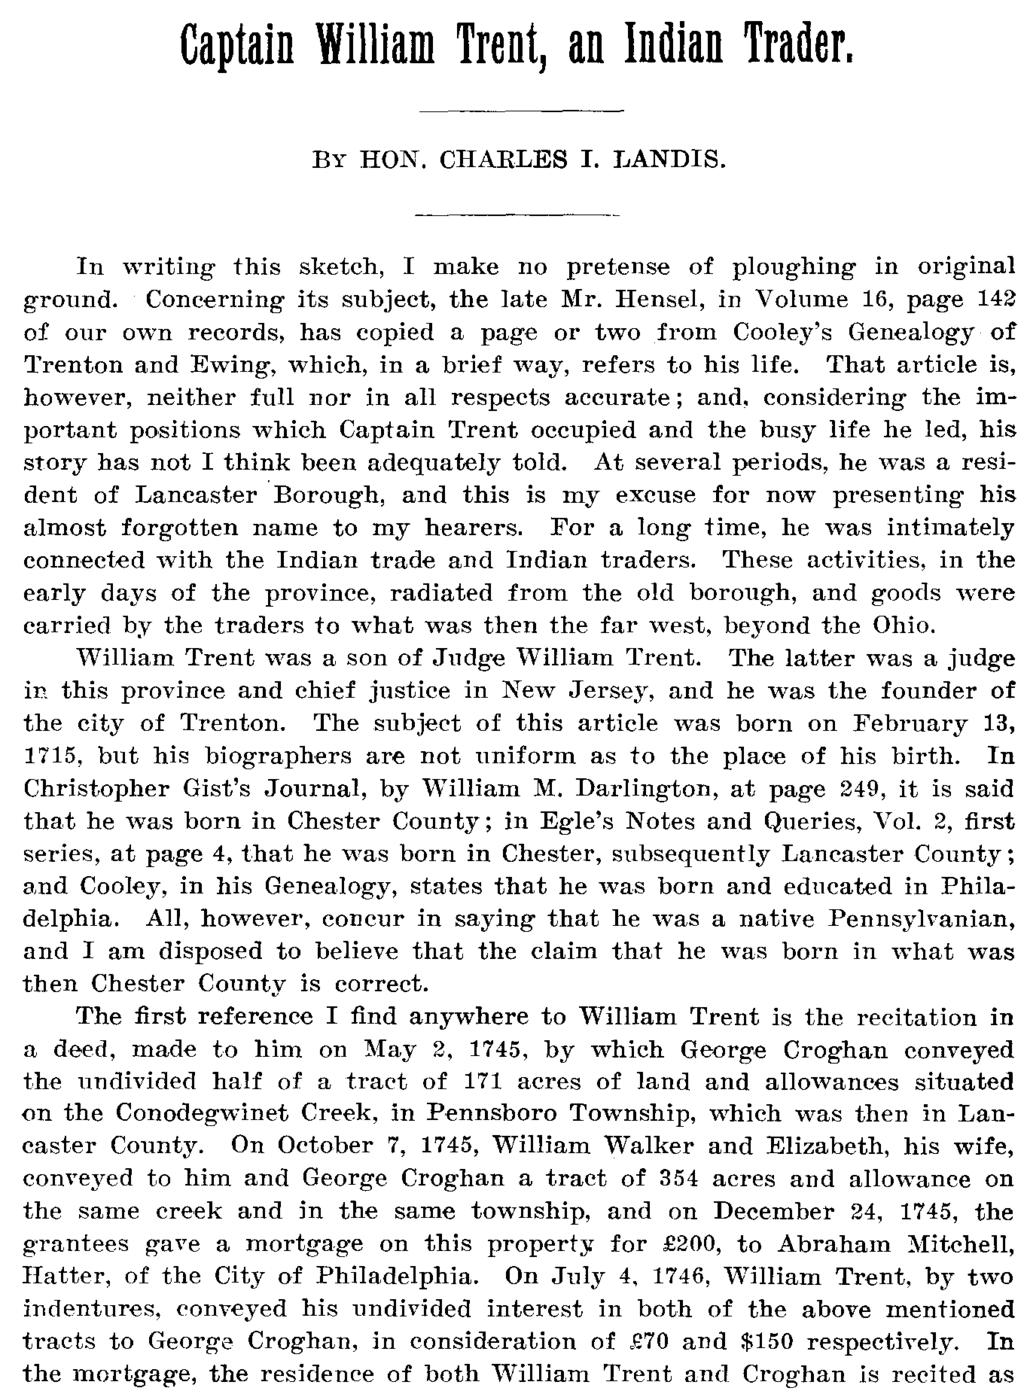 Captain William Trent, an Indian Trader. BY HON. CHARLES I. LANDIS. In writing this sketch, I make no pretense of ploughing in original ground. Concerning its subject, the late Mr.